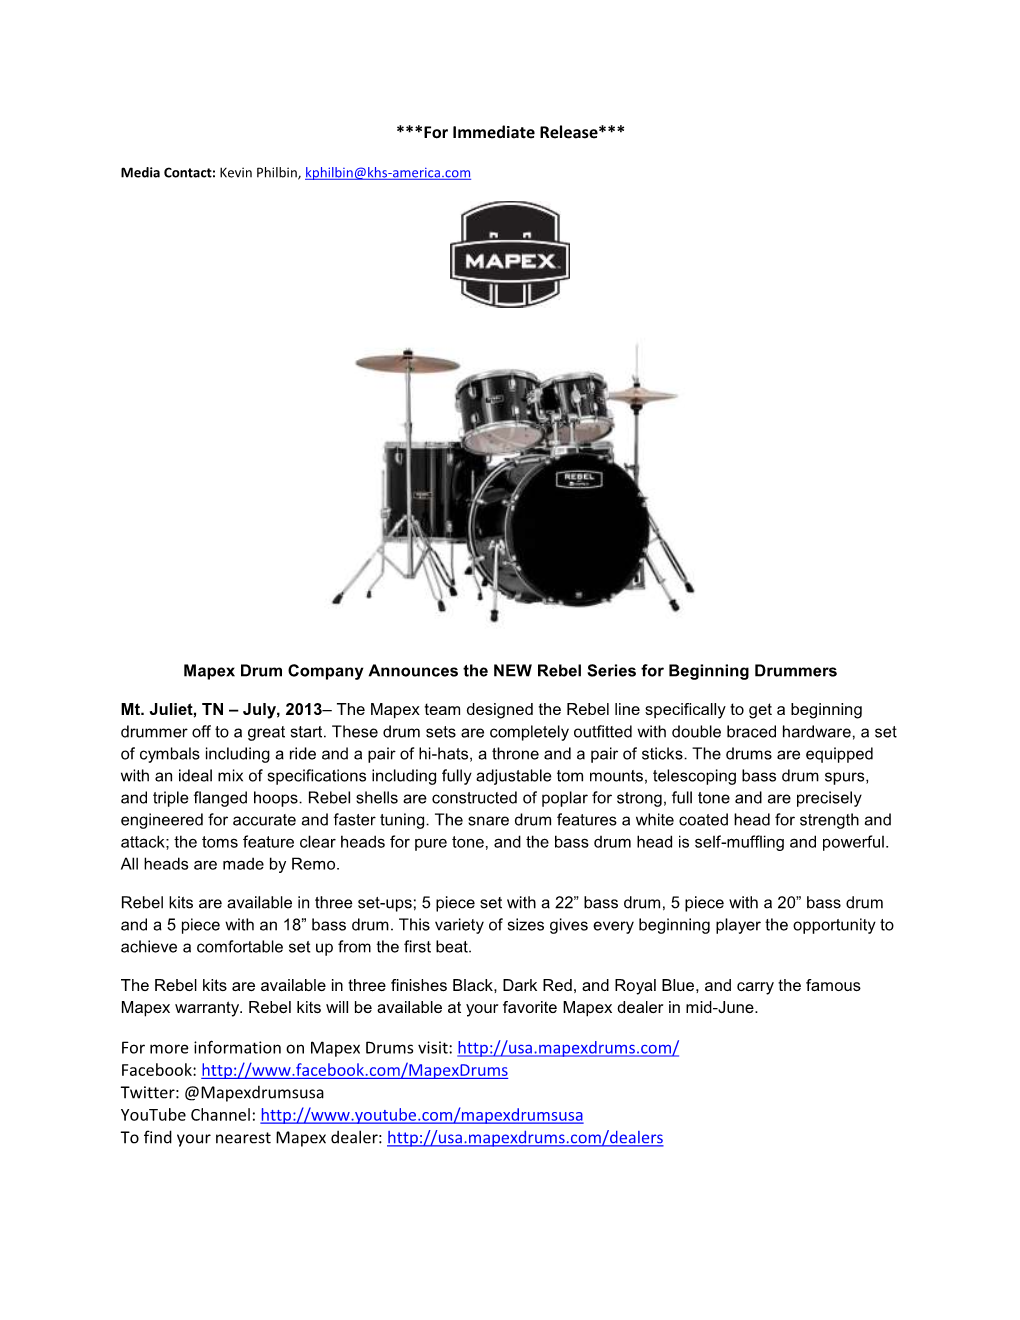 ***For Immediate Release*** for More Information on Mapex Drums Visit